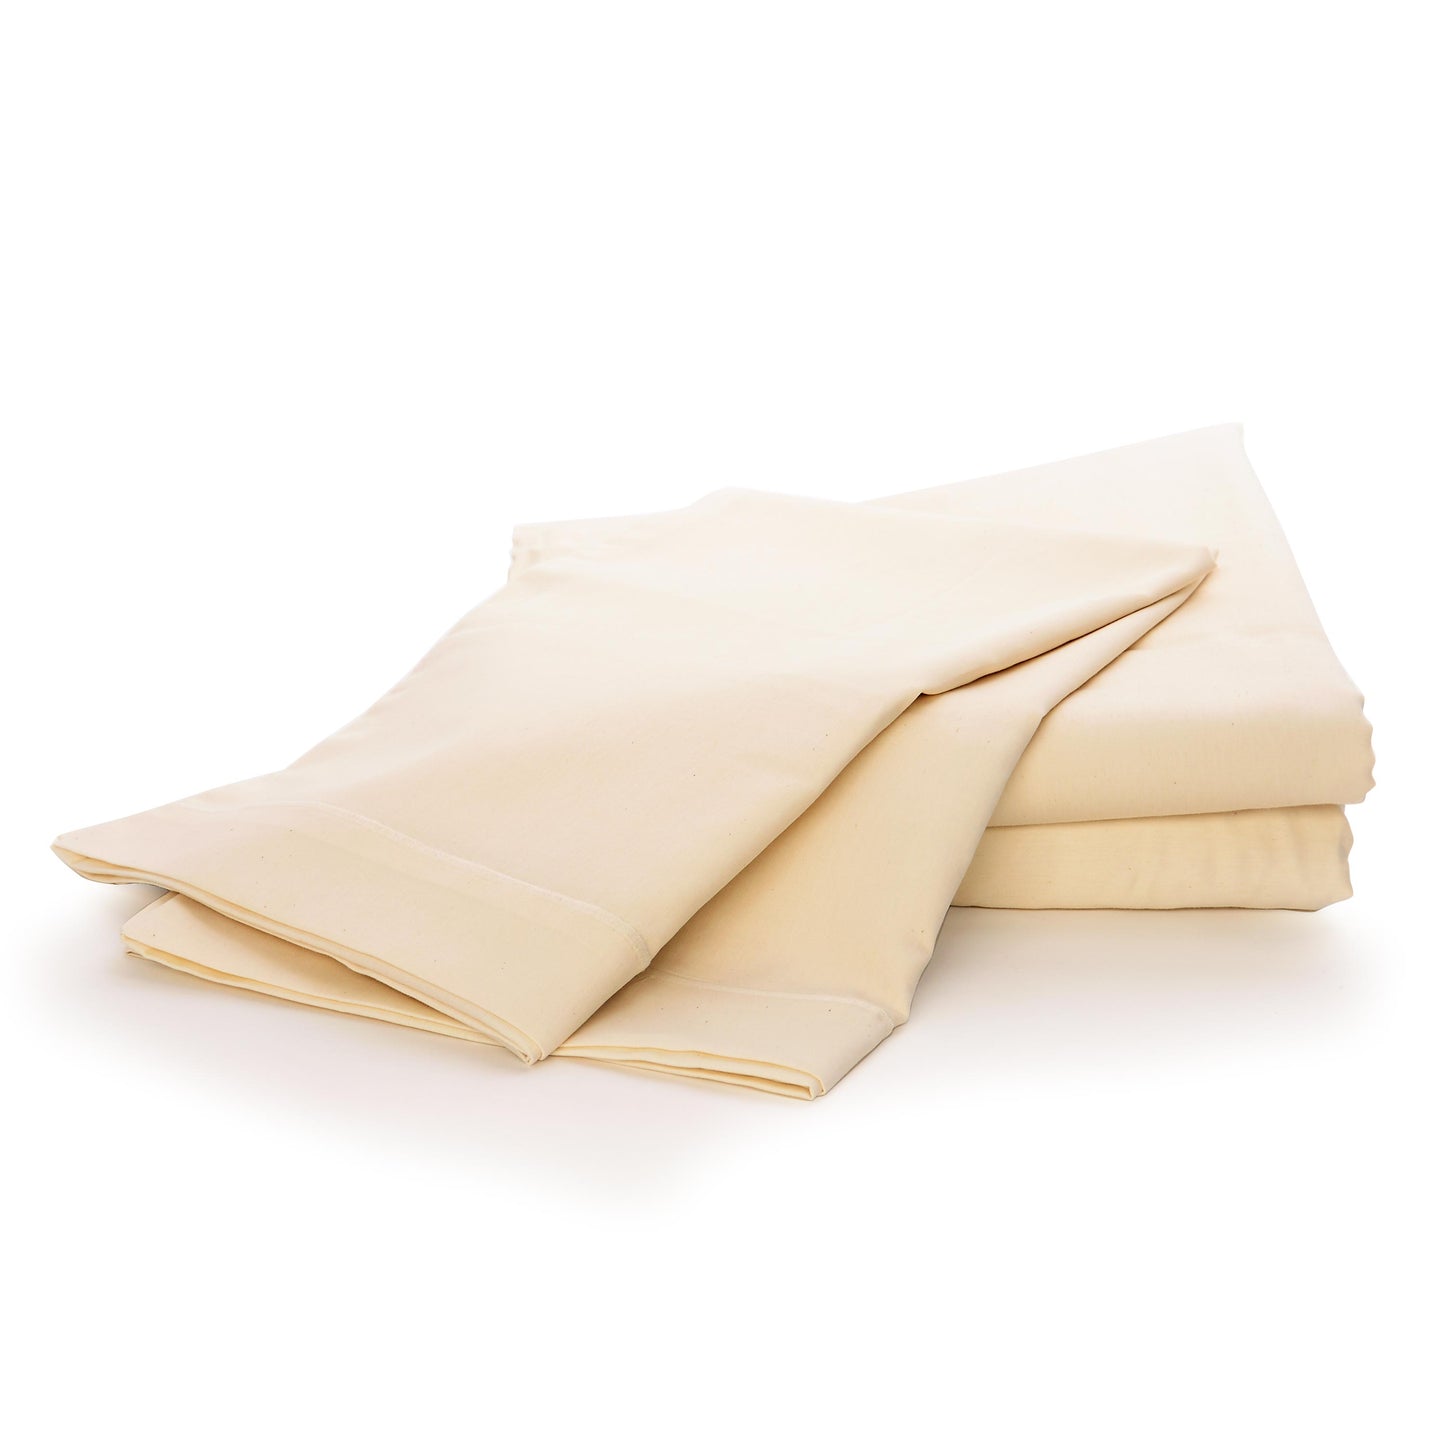 Pure Pillowcases - Certified Organic Cotton Pillowcases in Ivory